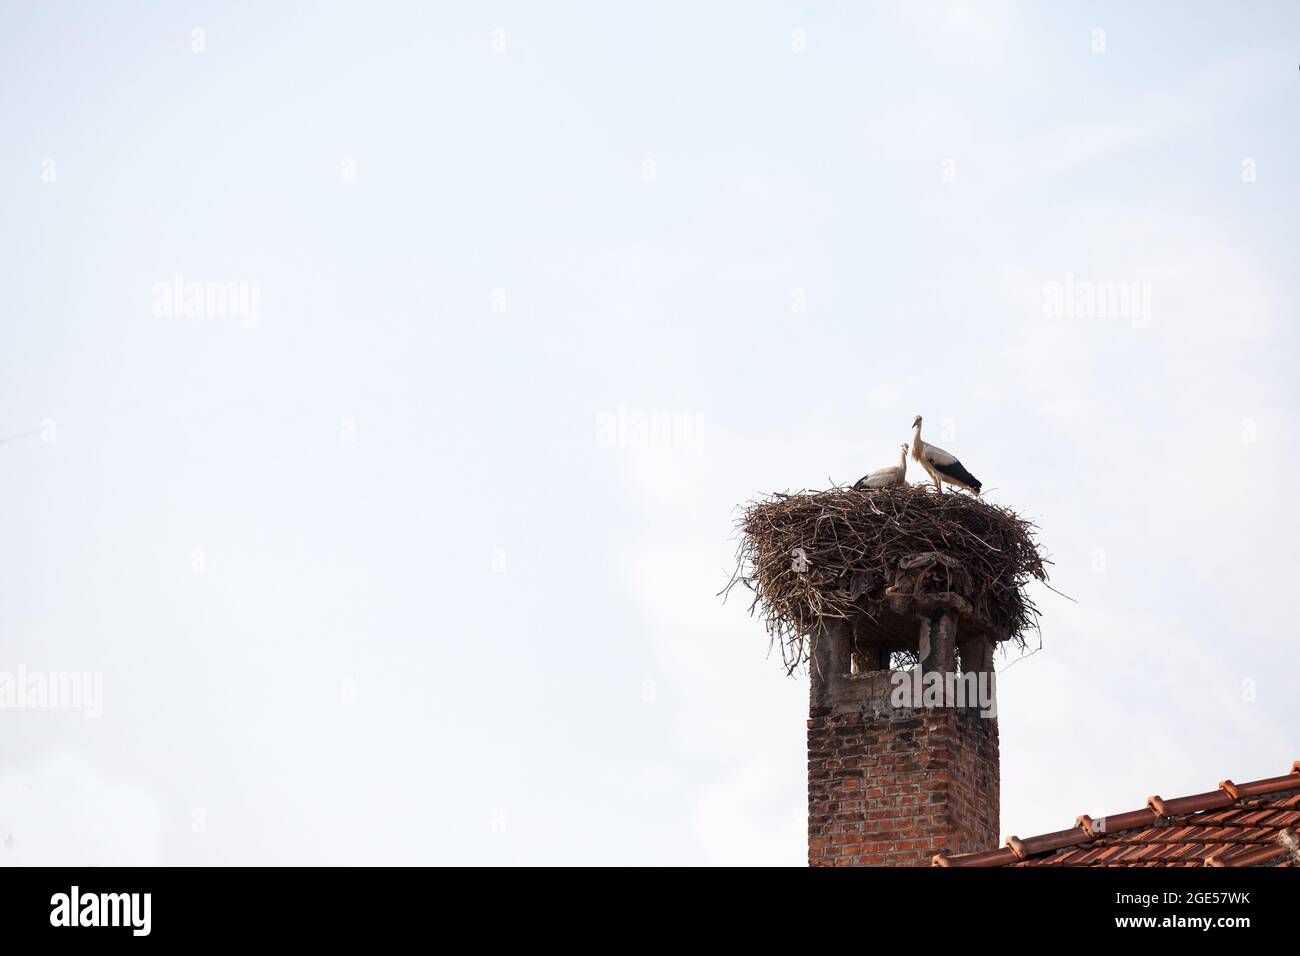 Picture of a storn nest with the bird standing on it during a sunny afternoon. Storks are large, long-legged, long-necked wading birds with long, stou Stock Photo